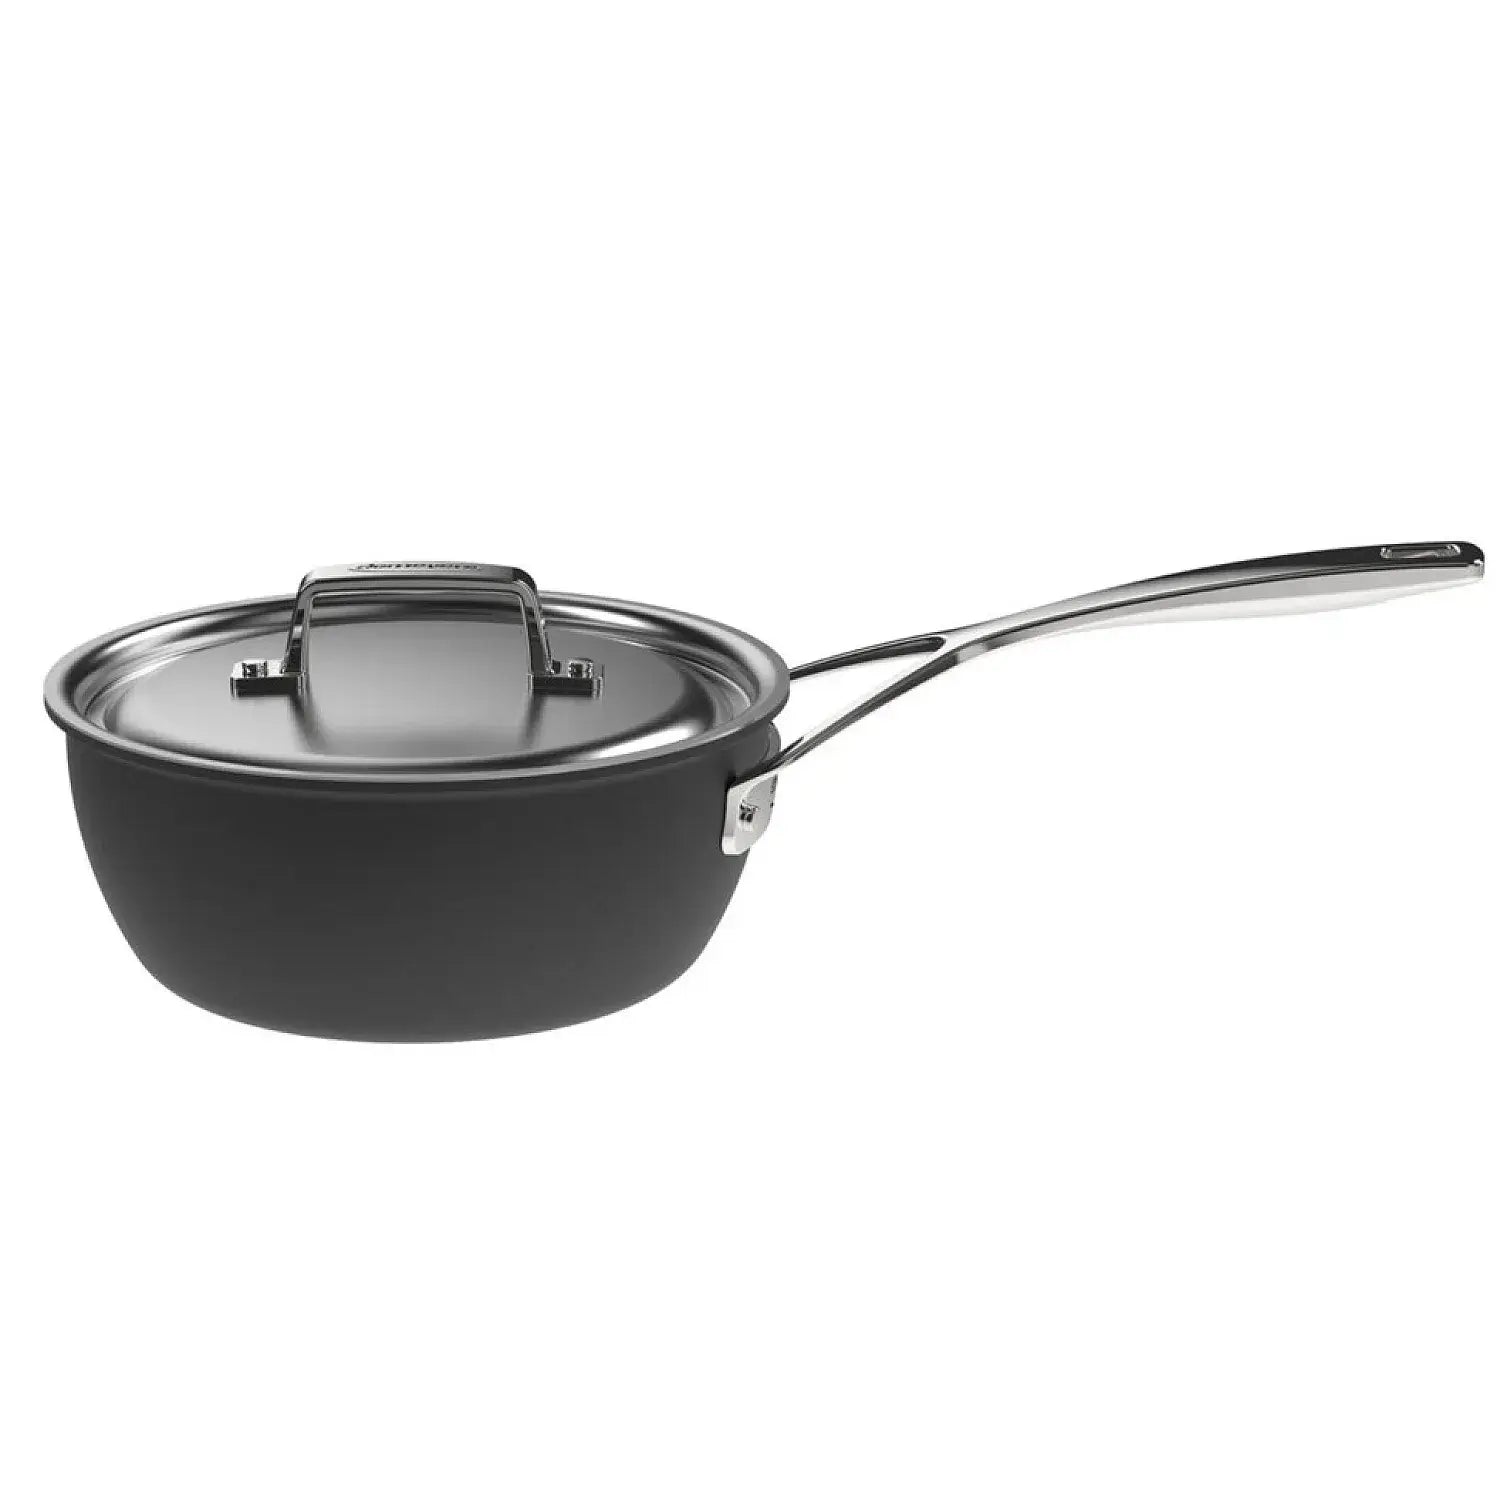 Demeyere Black 5 Conical Sauteuse with Lid